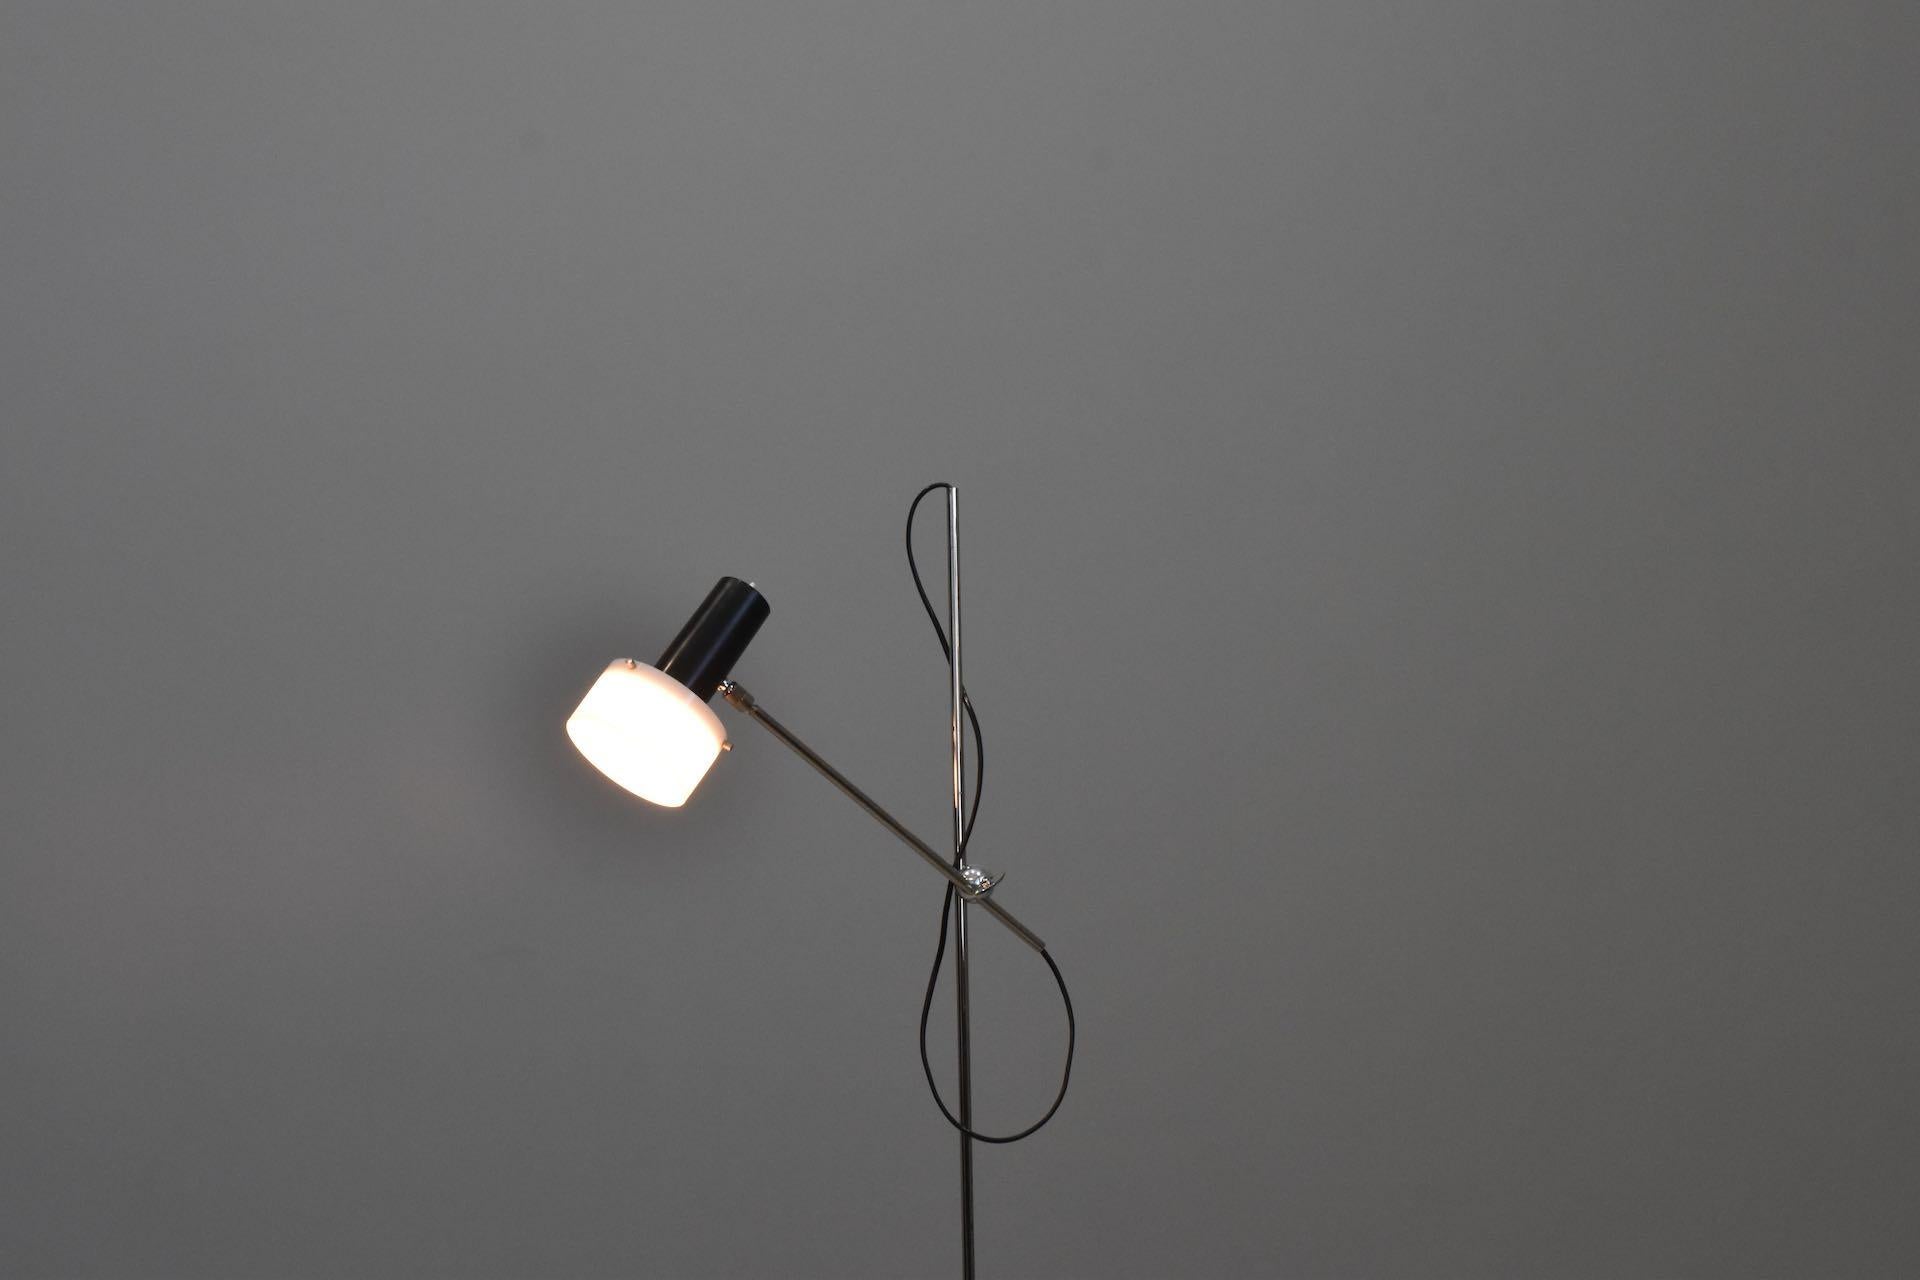 Gino Sarfatti Mod. 1083 Floor Lamp for Arteluce, Italy, 1962 In Excellent Condition For Sale In Rovereta, SM